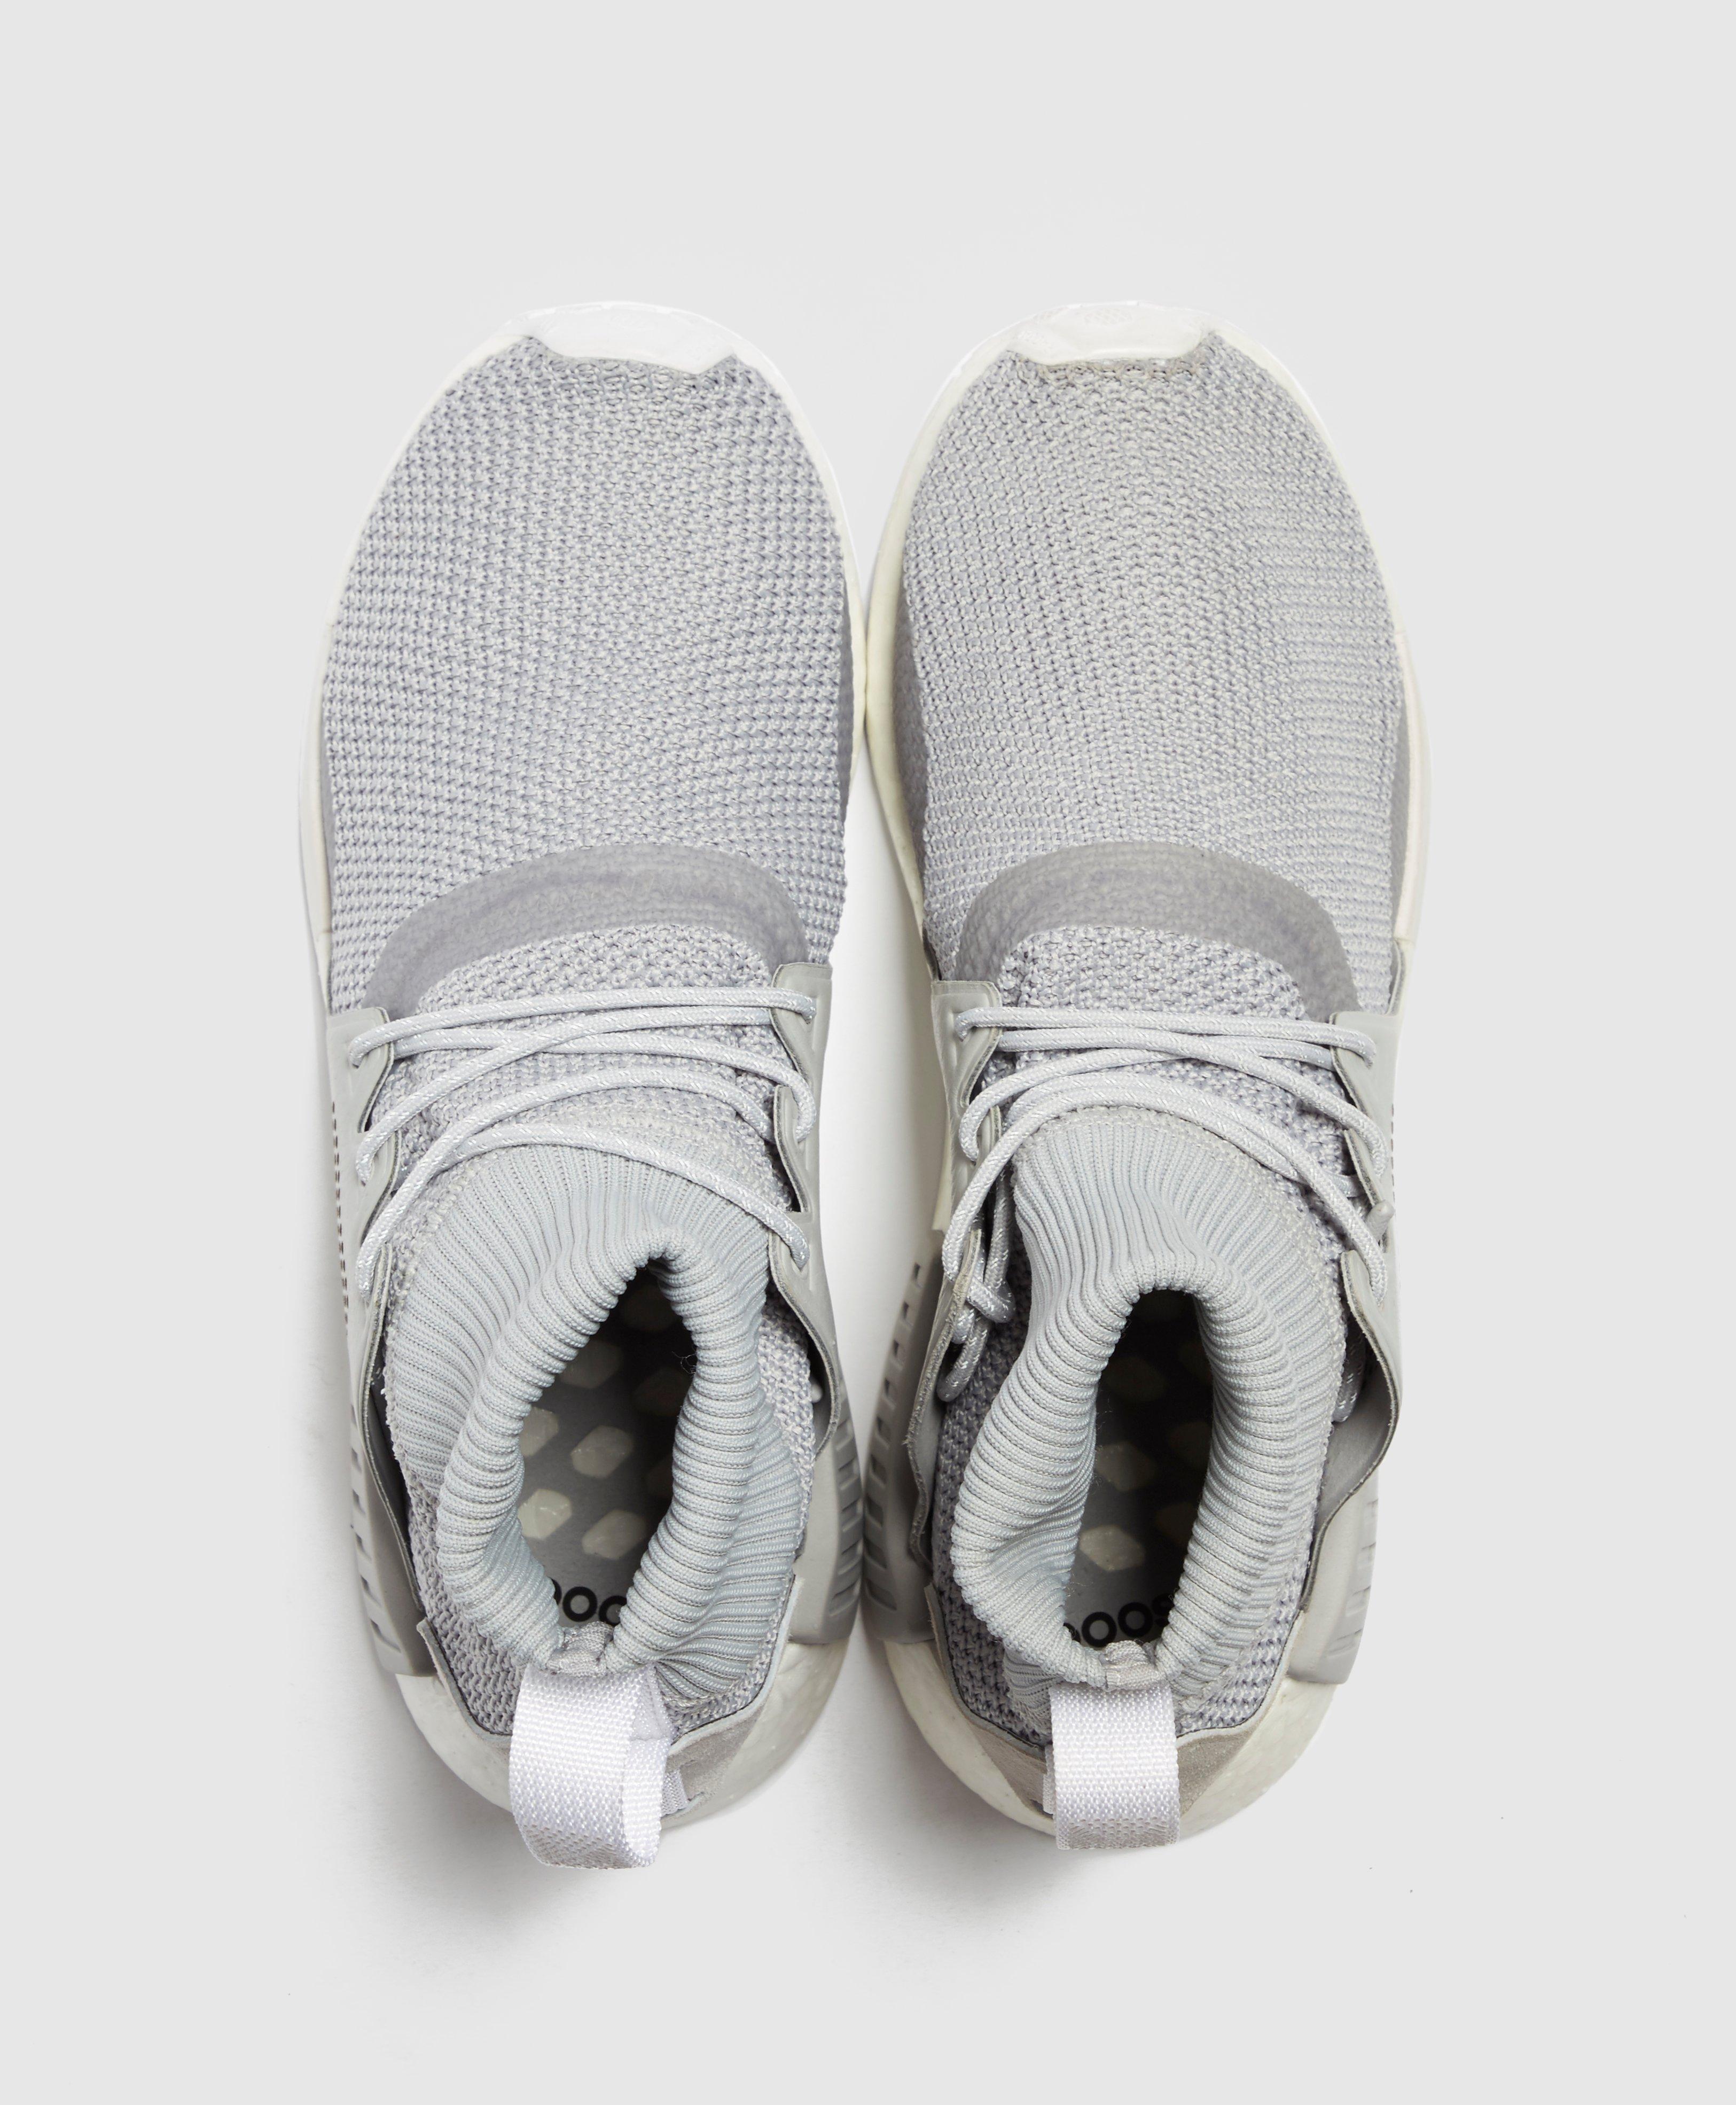 Adidas NMD XR1 Winter Gray Pack Where To Buy BZ0633.